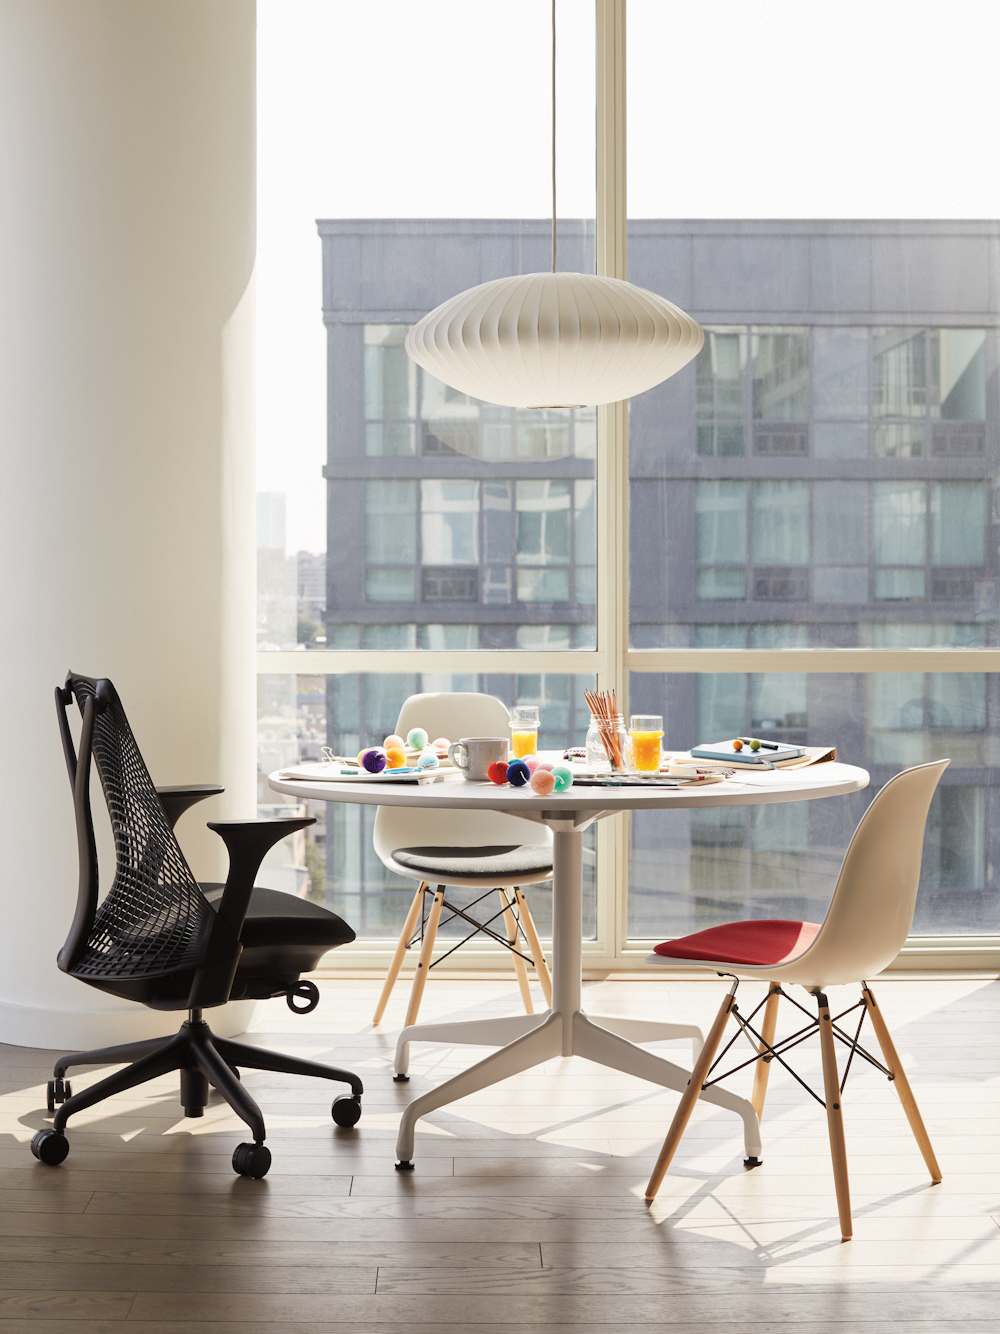 Eames Table with Round Top and Segmented Base with Sayl Chair and Eames Shell Side Chairs with Seatpad